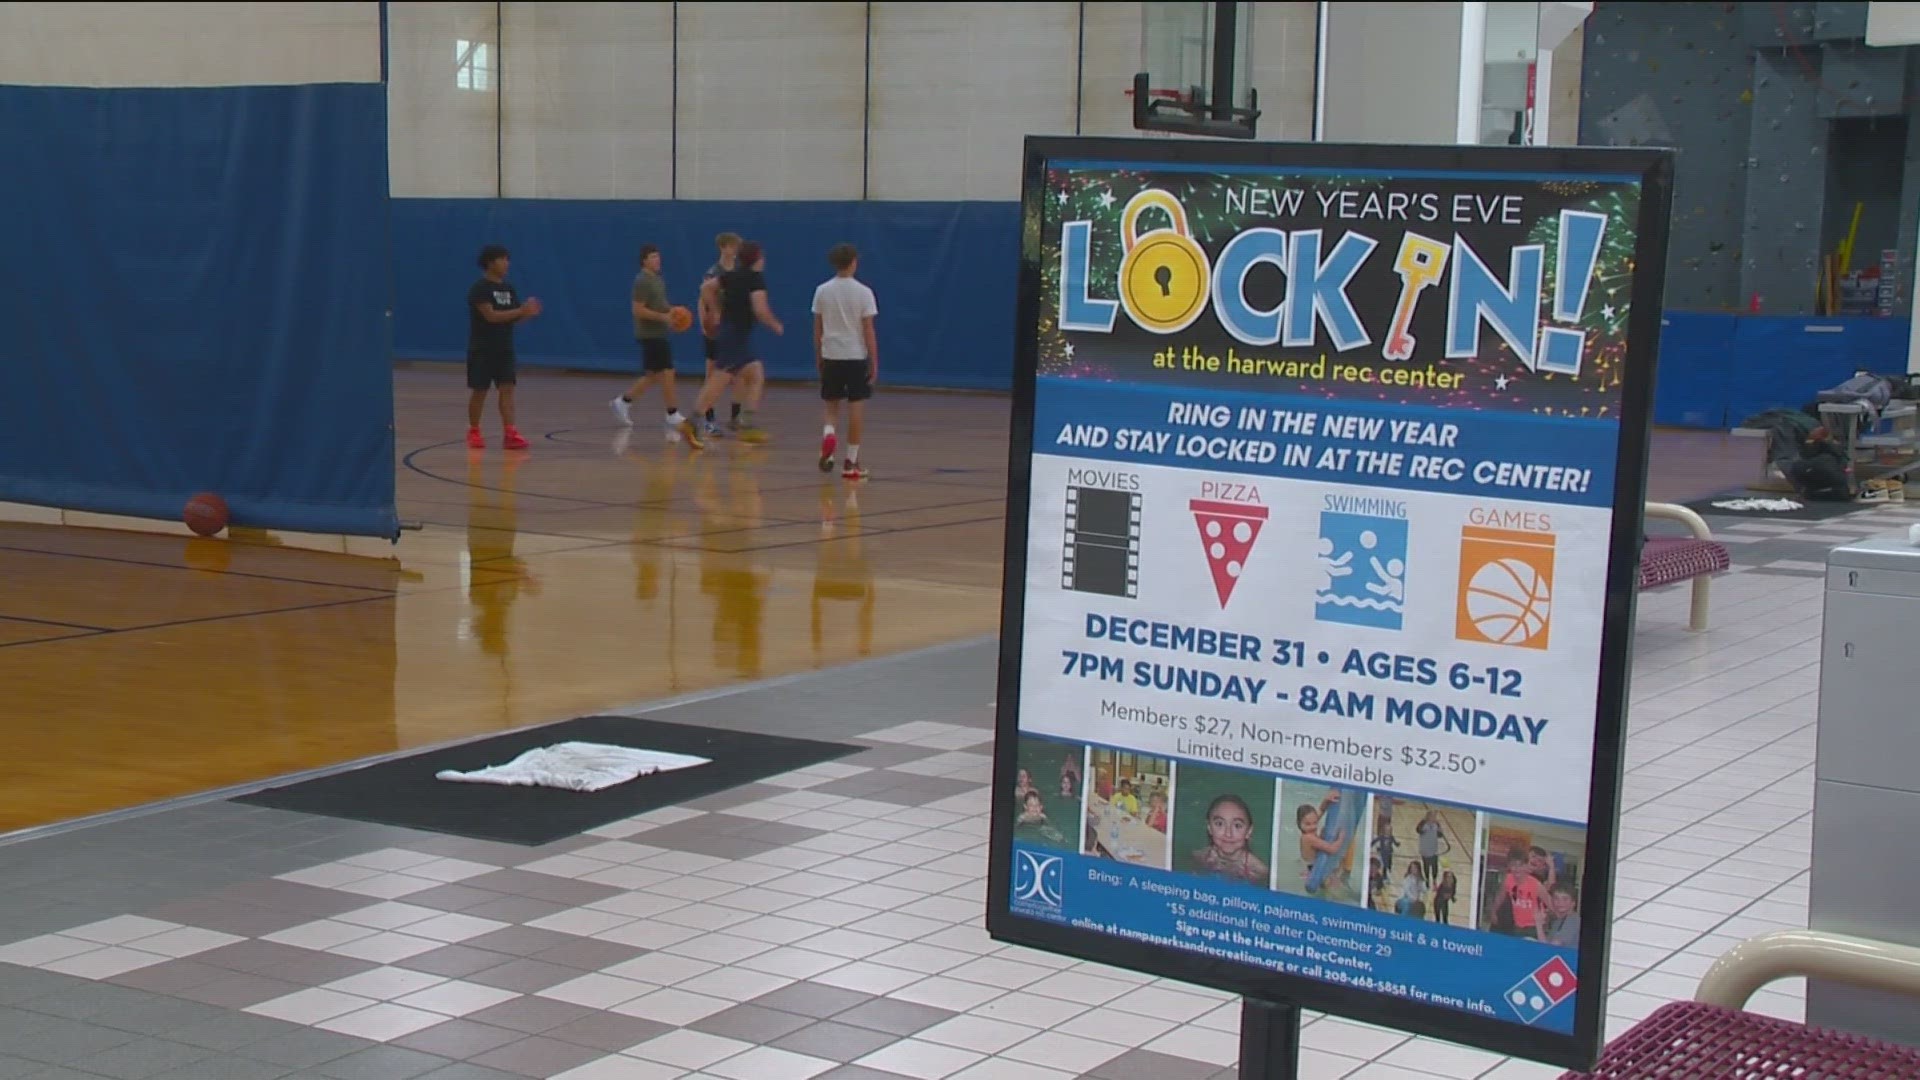 The center hosts multiple lock-in's throughout the year. It's open to kids 6-12 years old; capacity is capped at 75.